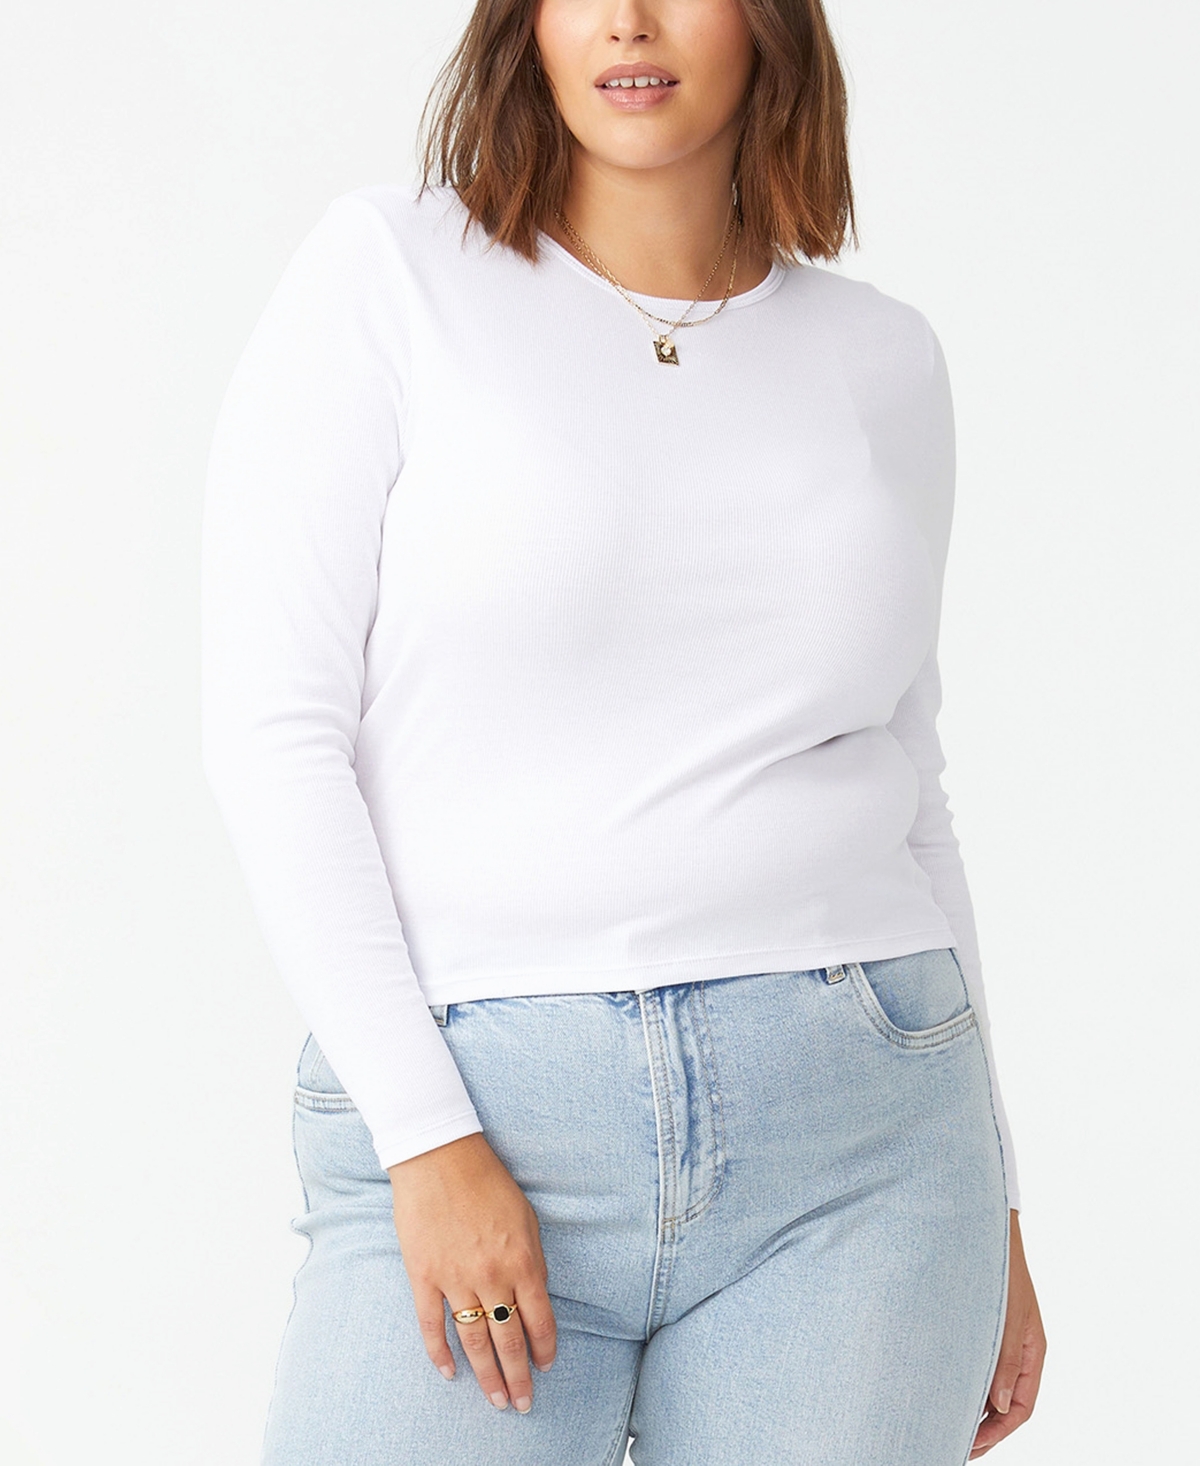 Cotton On Trendy Plus Size The One Rib Crew Long Sleeve Top